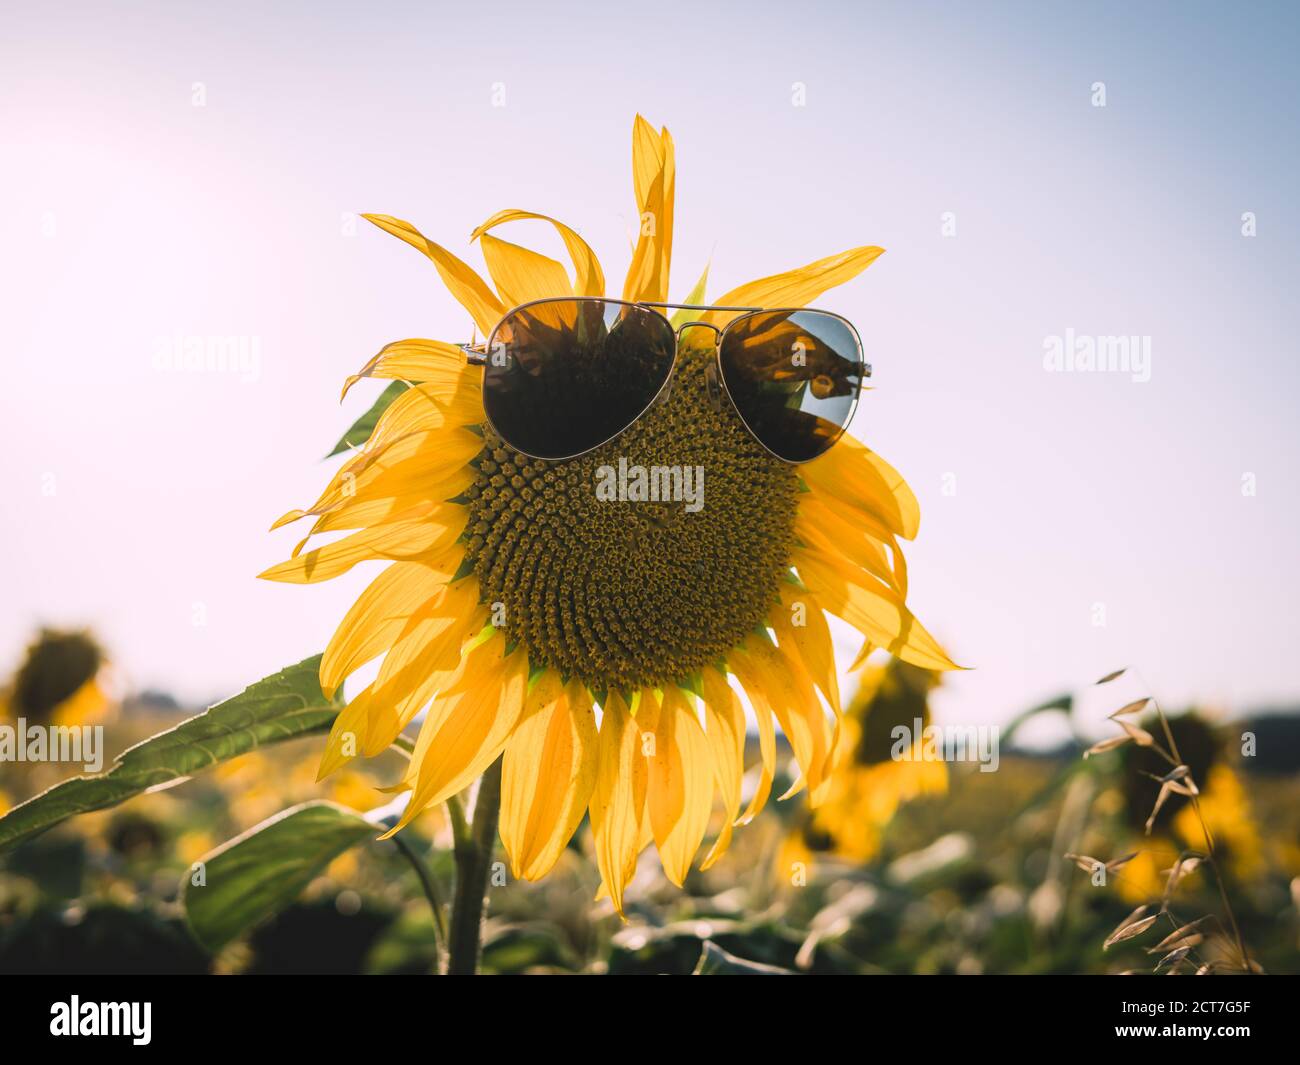 Funny picture of yellow sunflower wearing sunglasses. Stock Photo